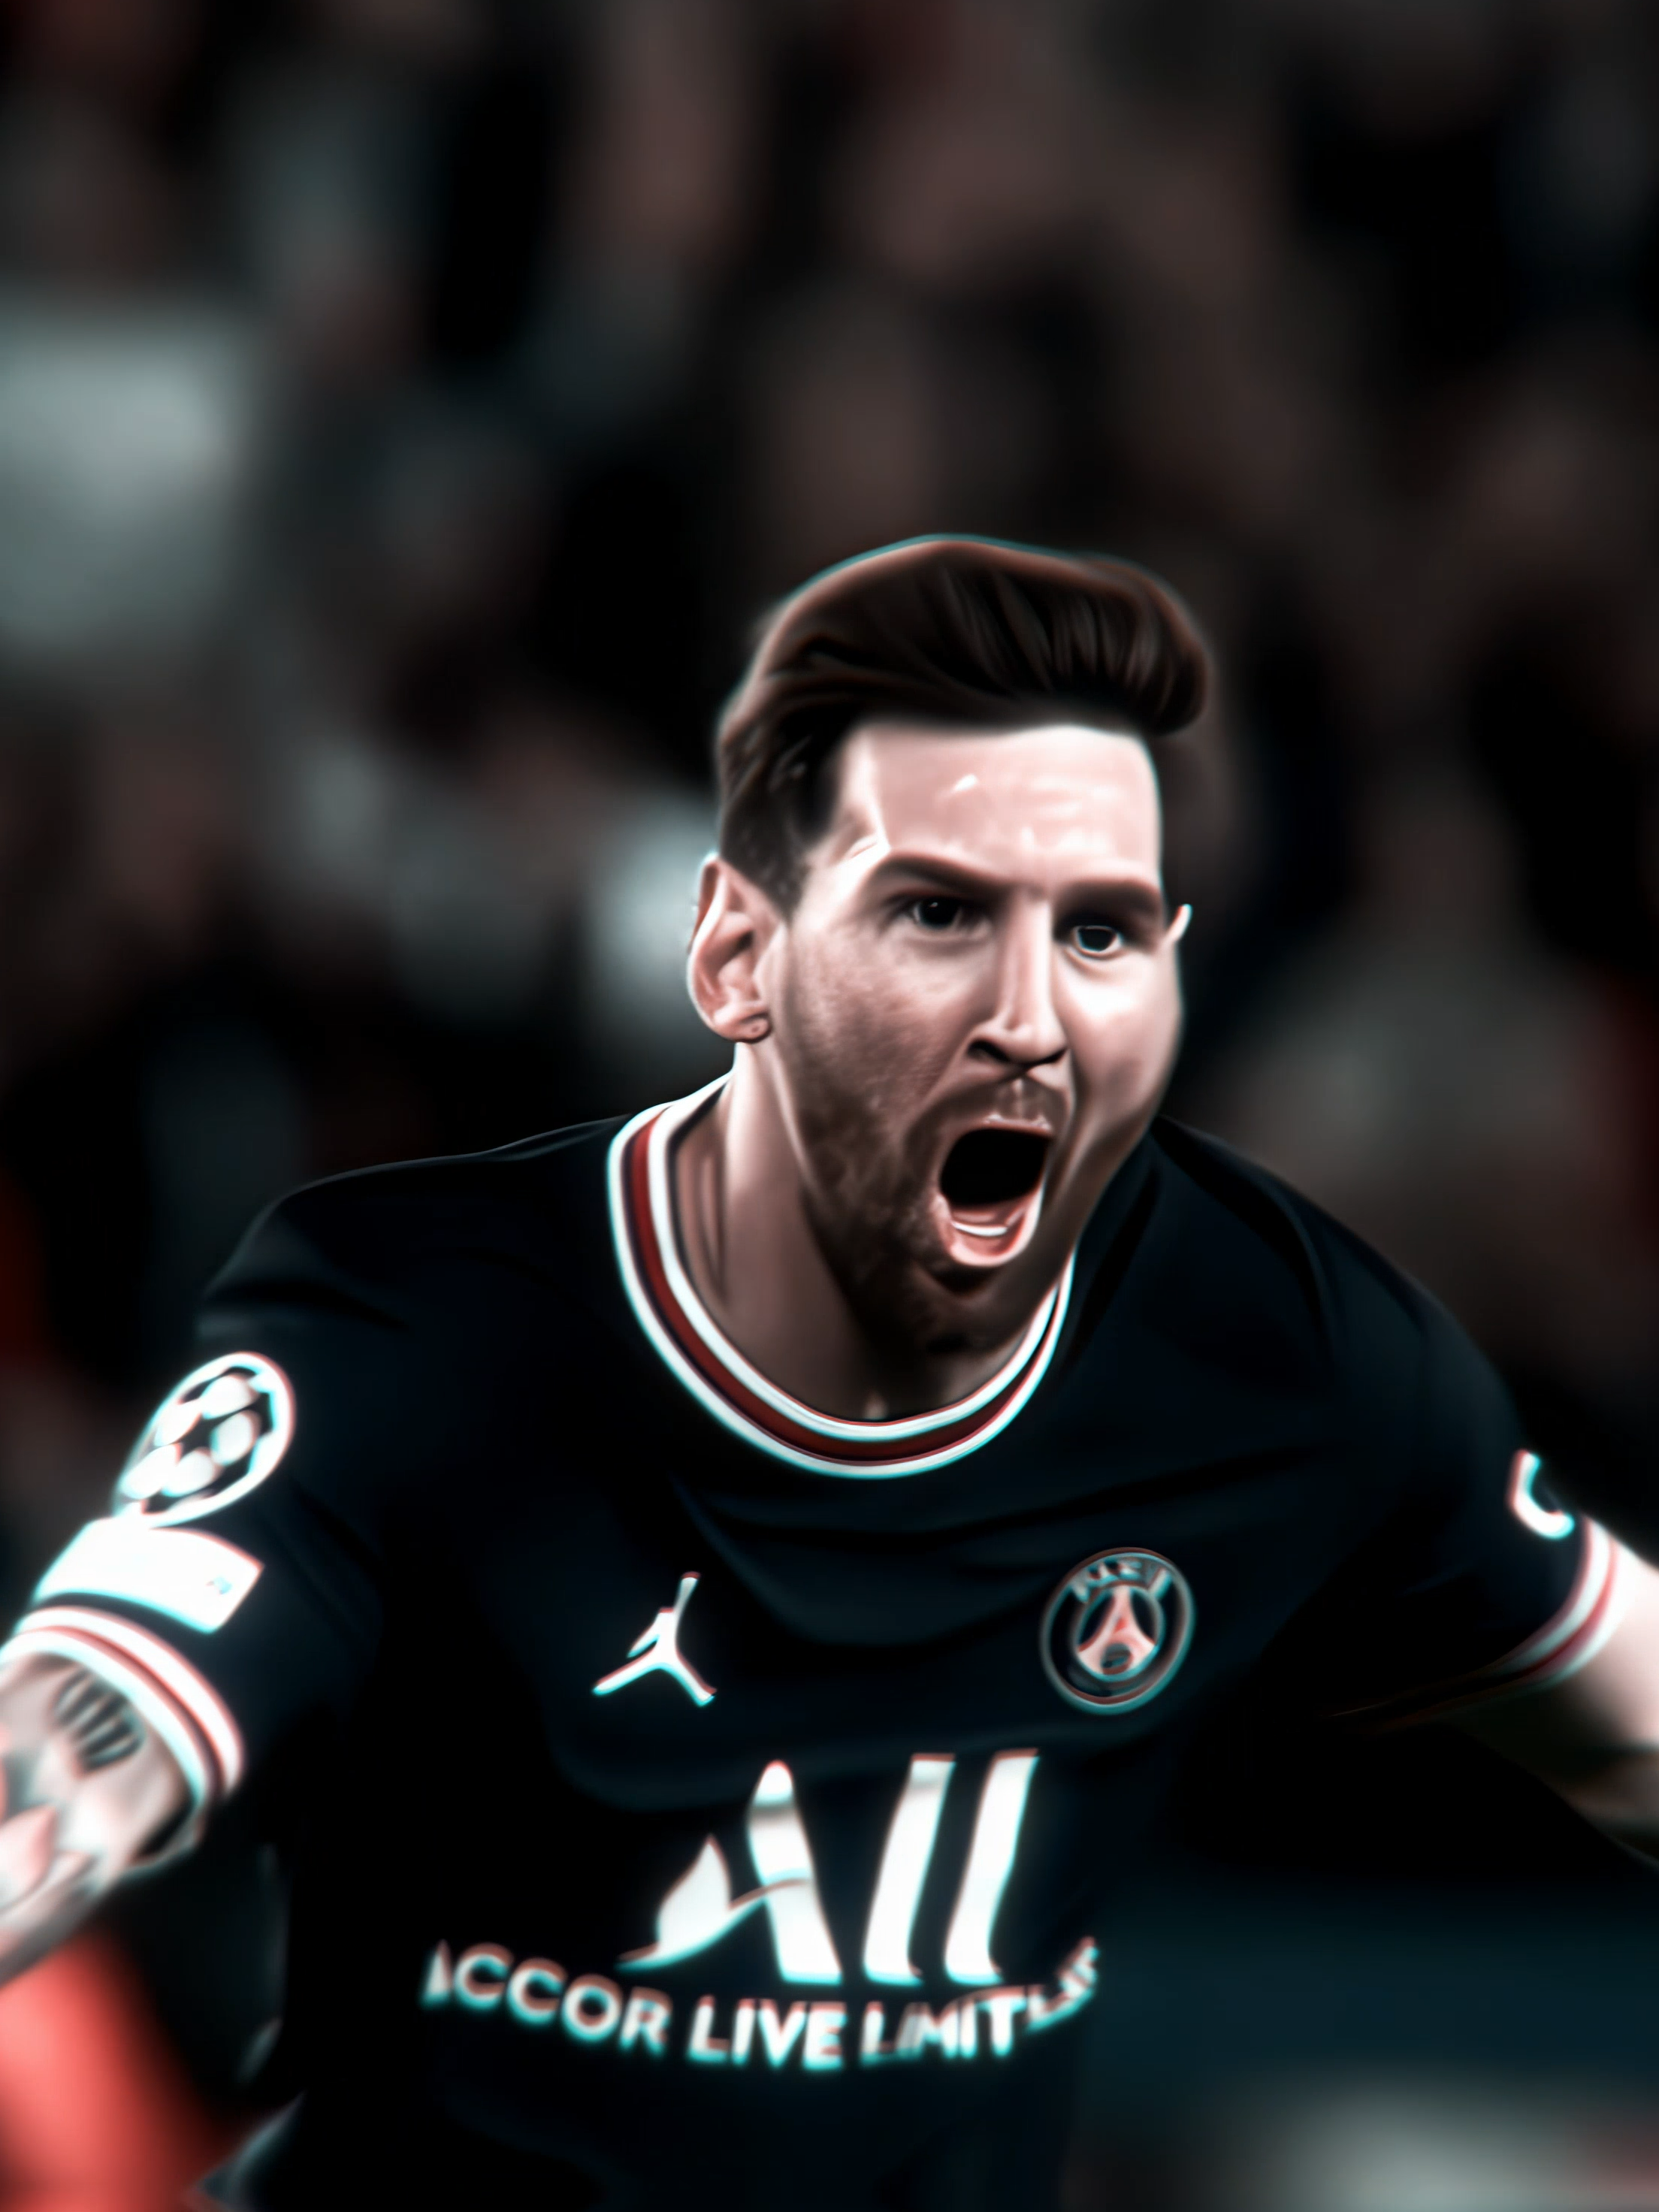 Meeehhssiiii🐐|Buy Presets in Bio! #messi #goat #sound #aftereffects #edit #football #annafry #blowthisup #viralvideo #noflop #viral #fyp